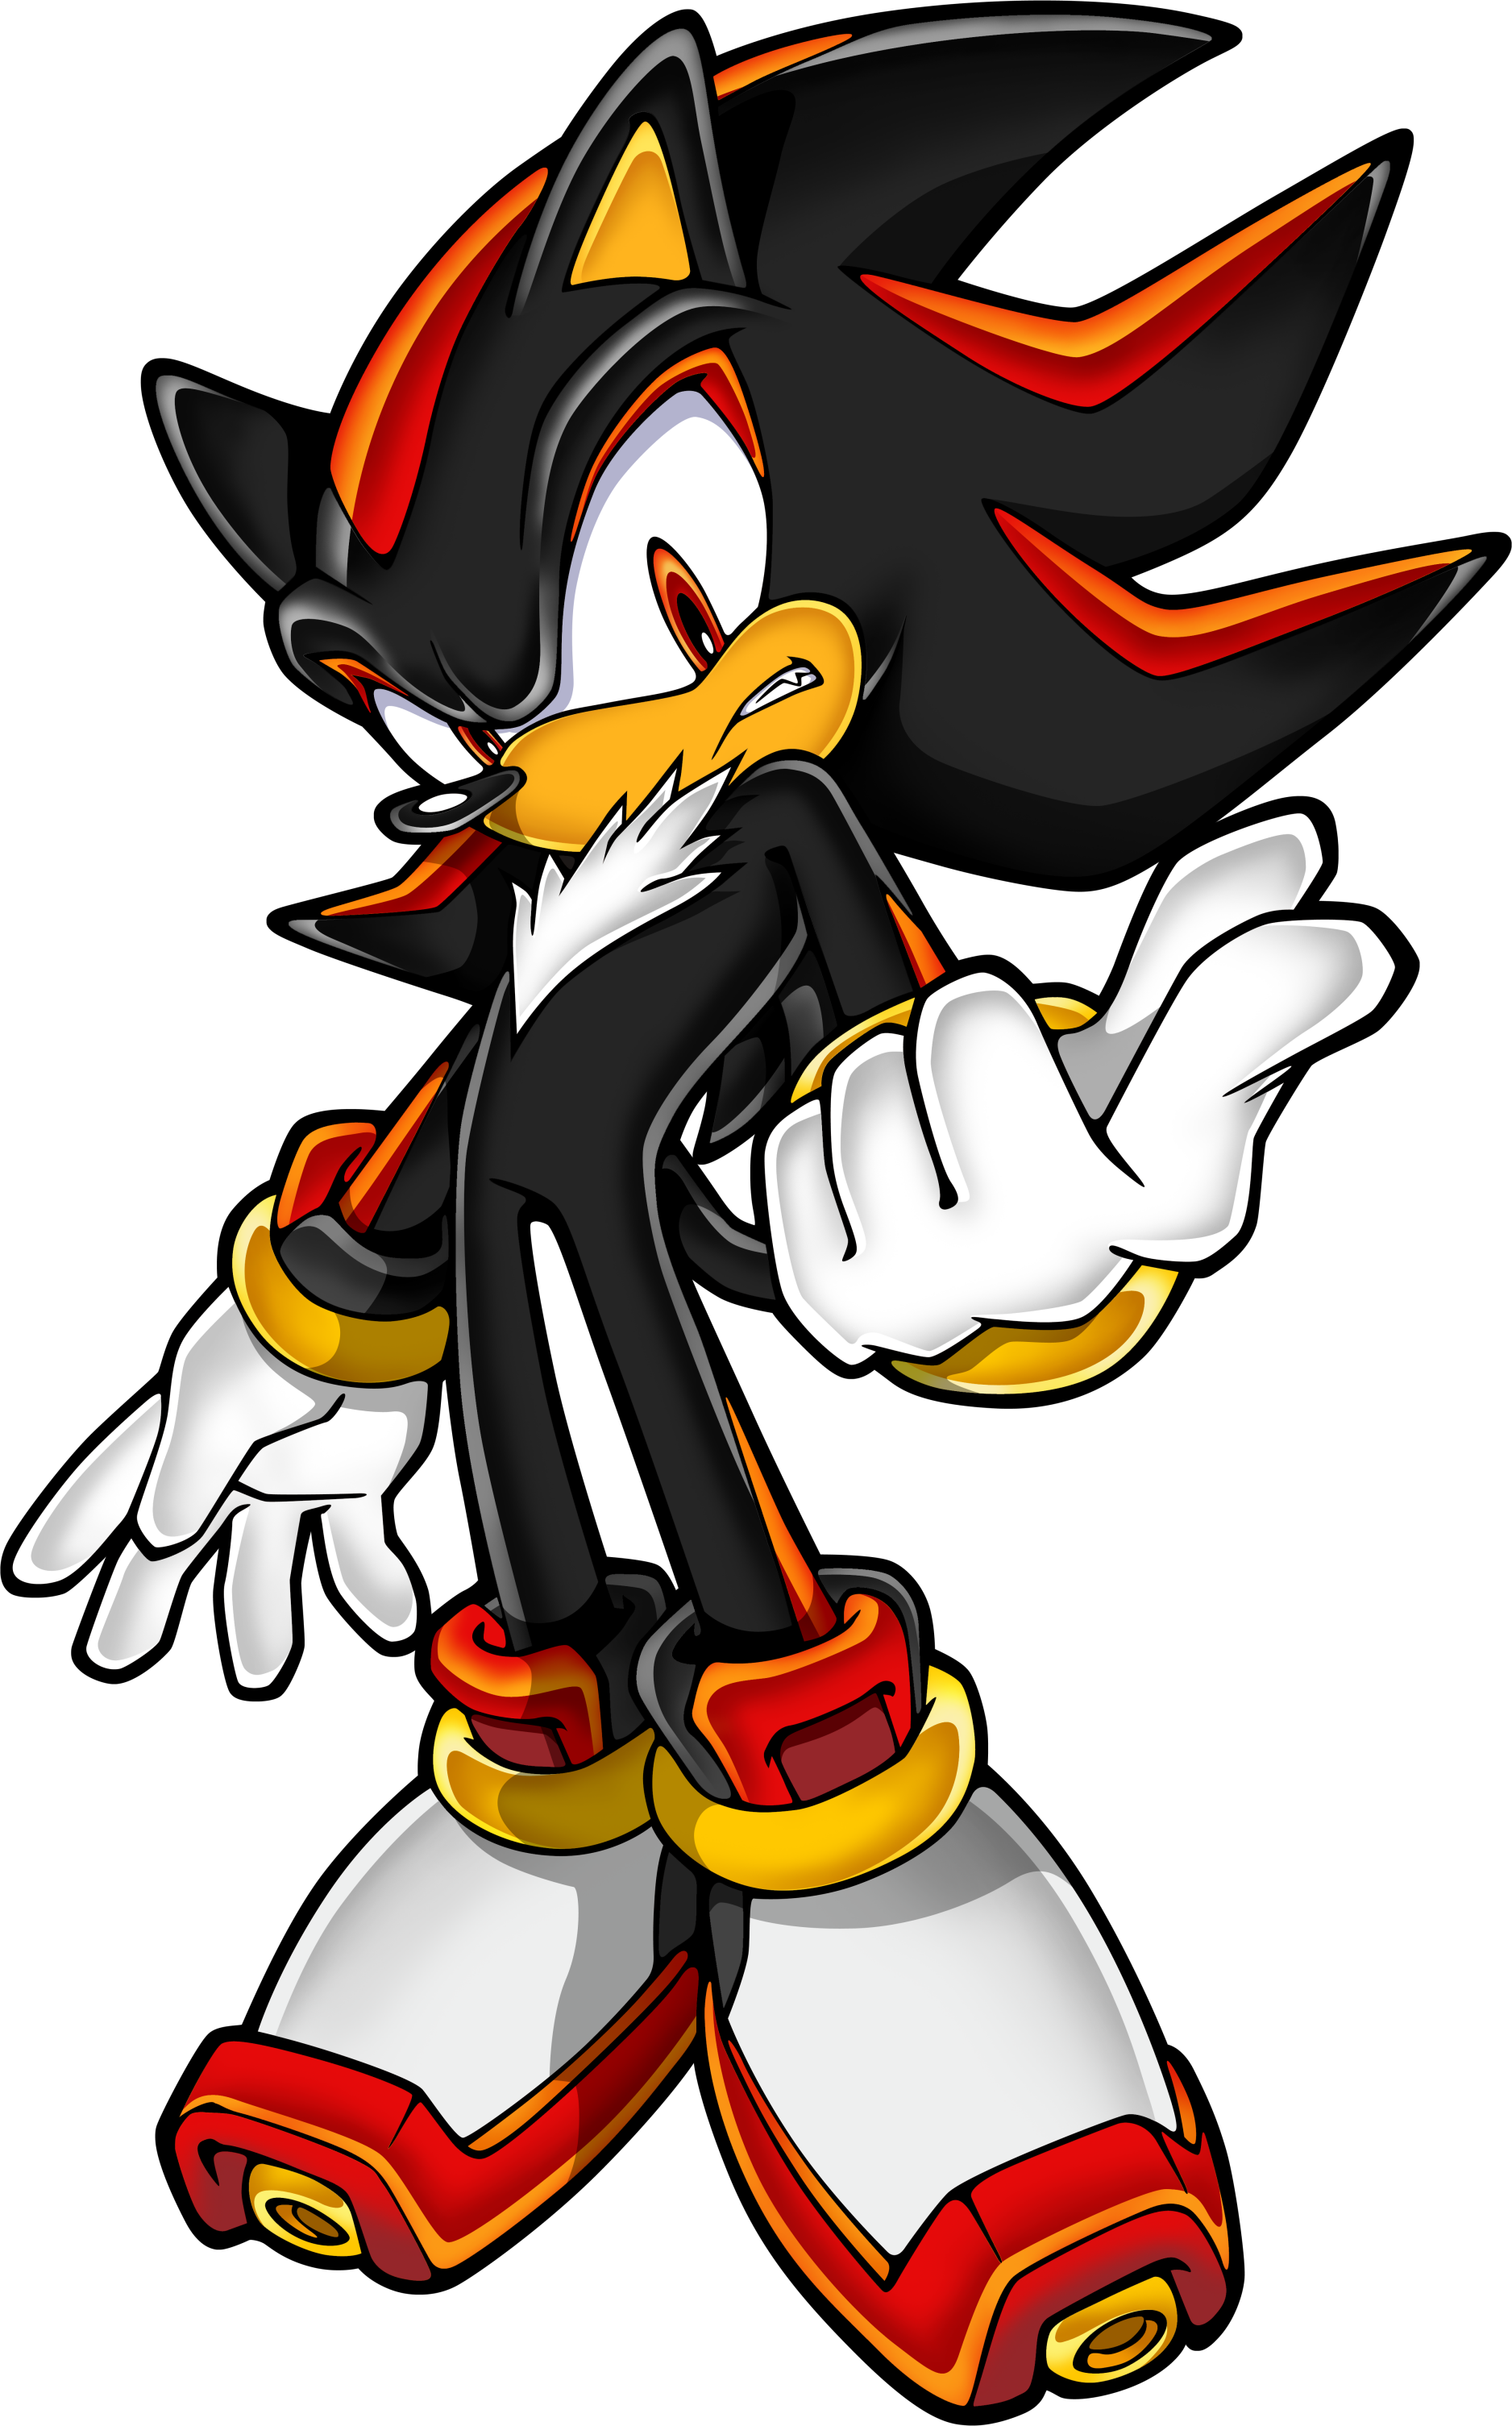 Shadow the Hedgehog Sonic the Hedgehog Sonic Chaos Super Shadow Sonic  Adventure 2, sonic the hedgehog pixel art transparent background PNG  clipart